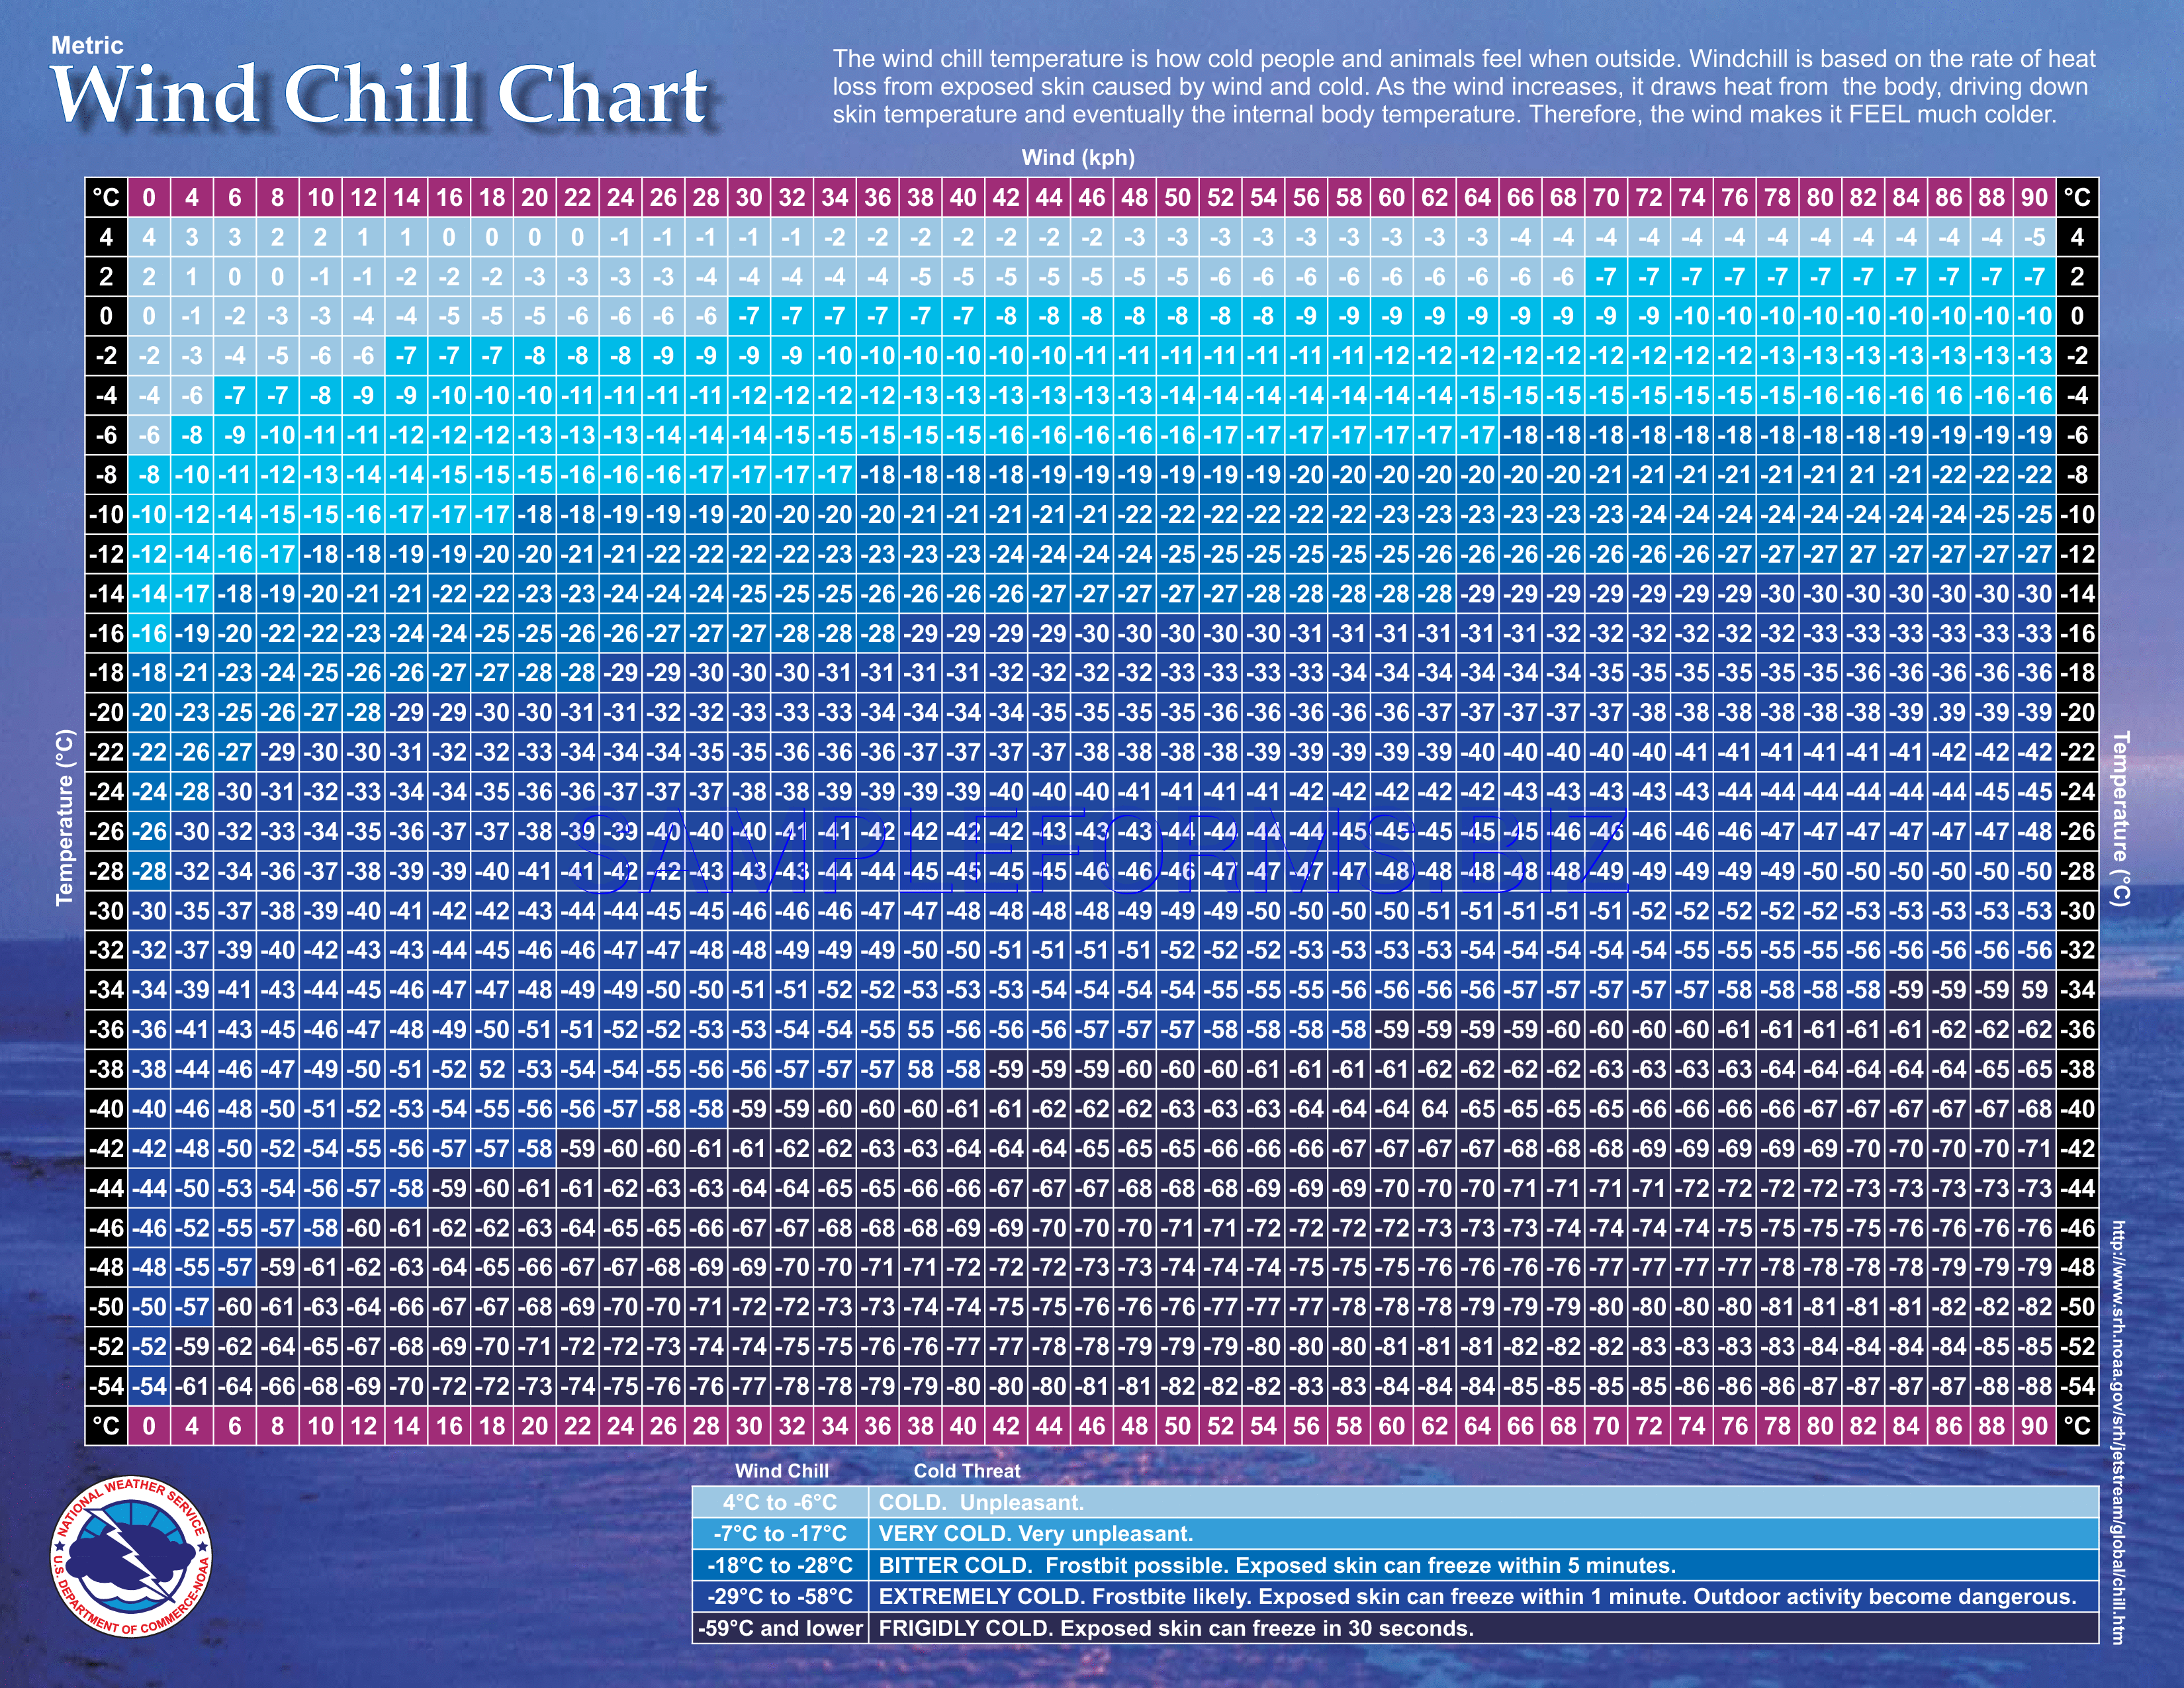 Printable Wind Chill Chart